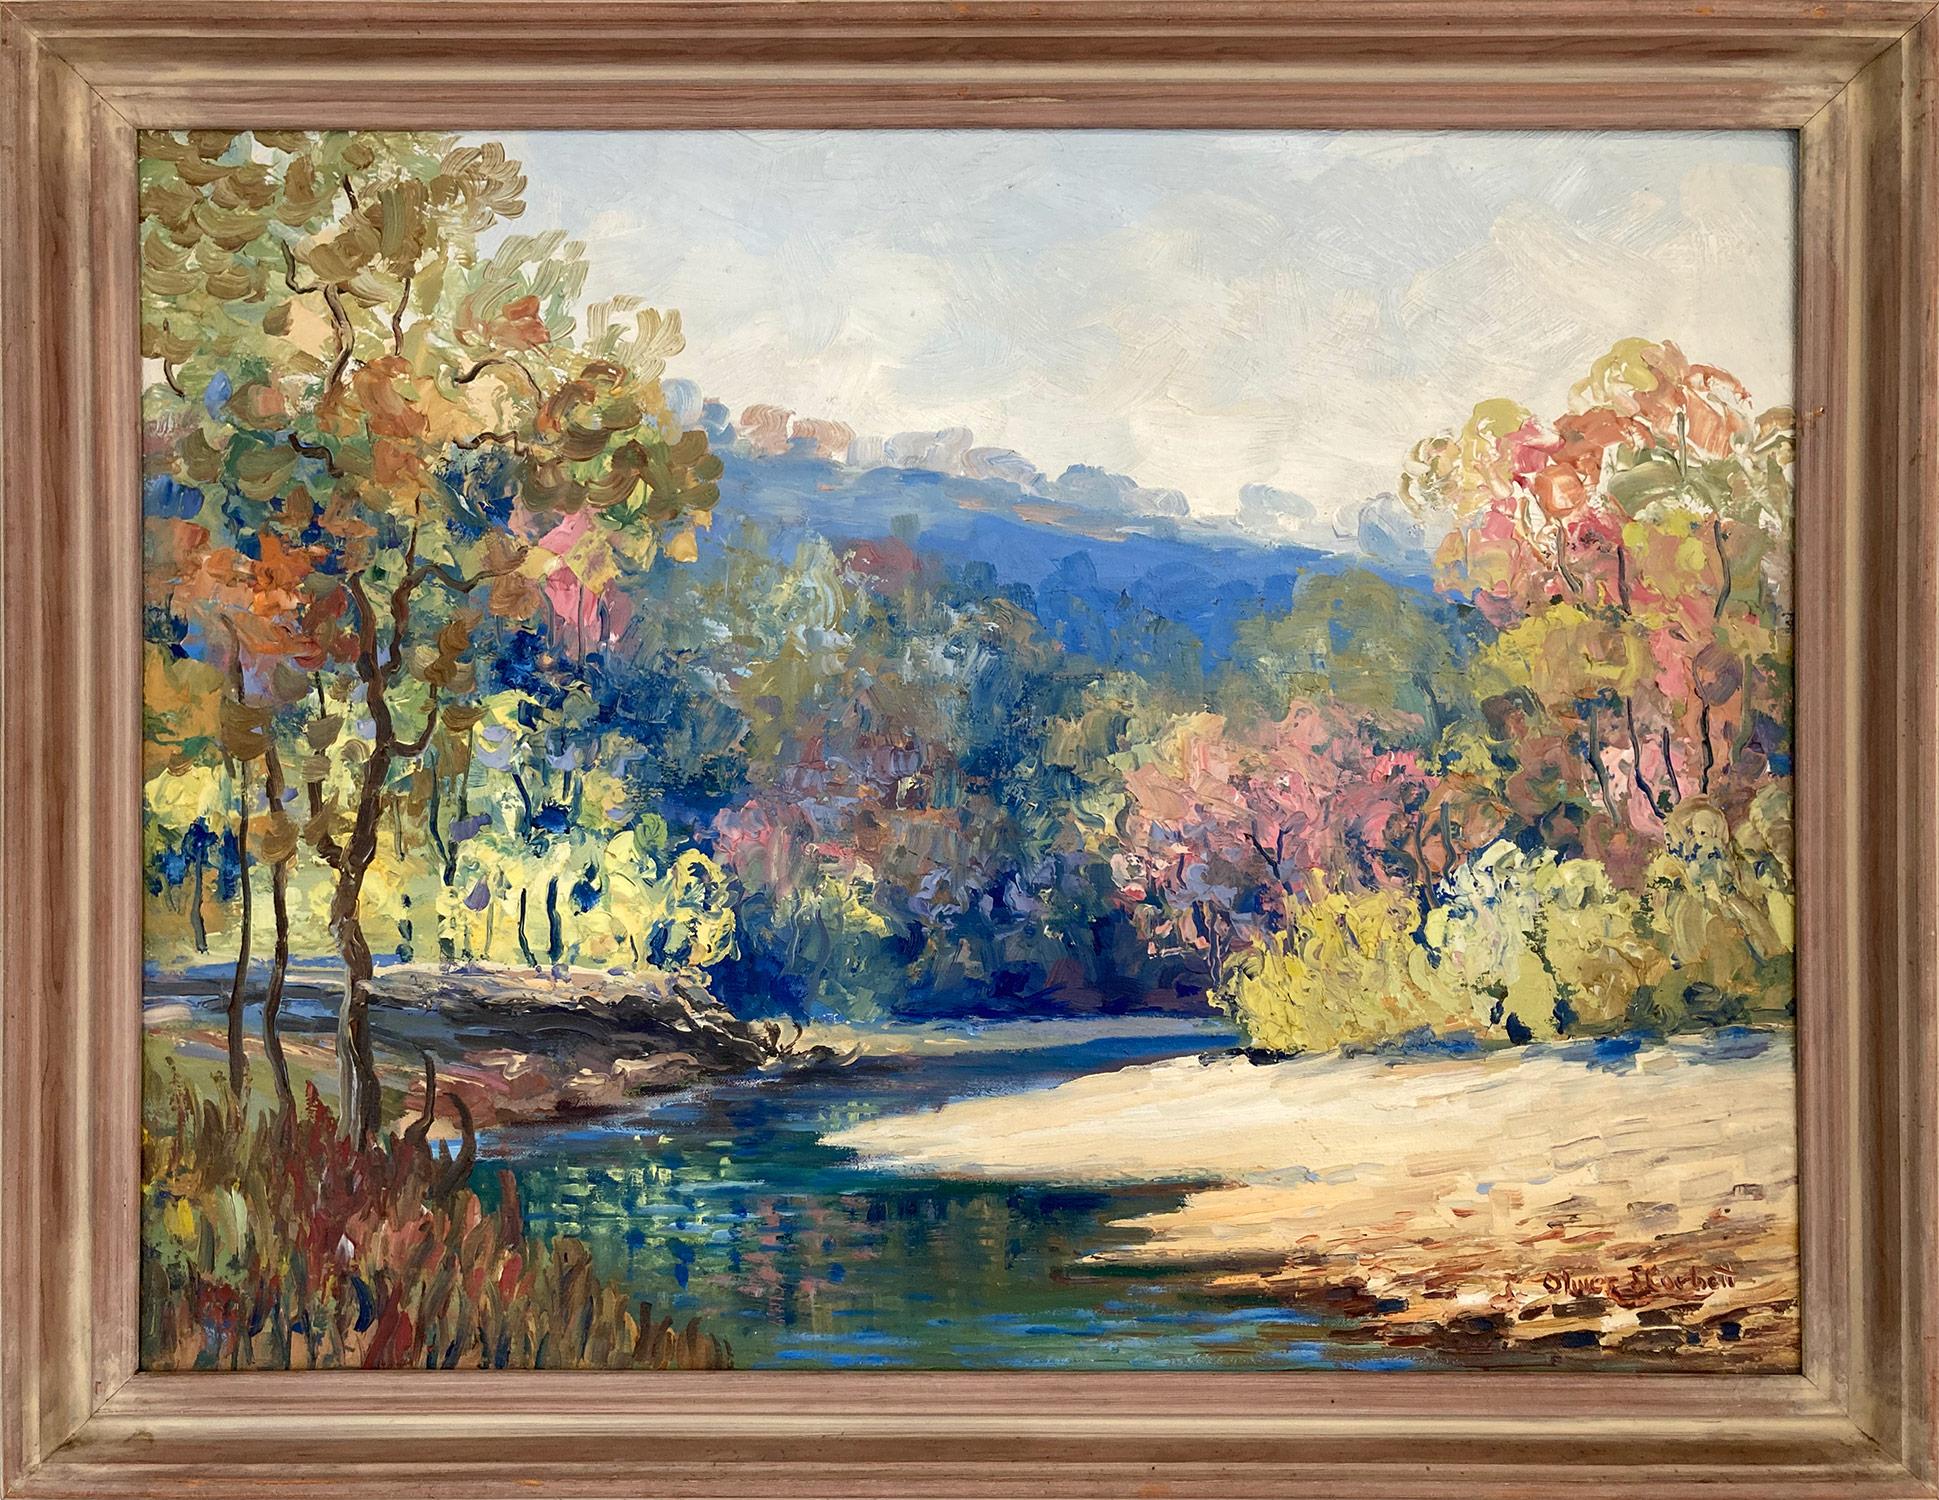 Oliver Corbett   Landscape Painting - "Along the River" 20th Century American Colorful Oil Painting of Landscape Trees